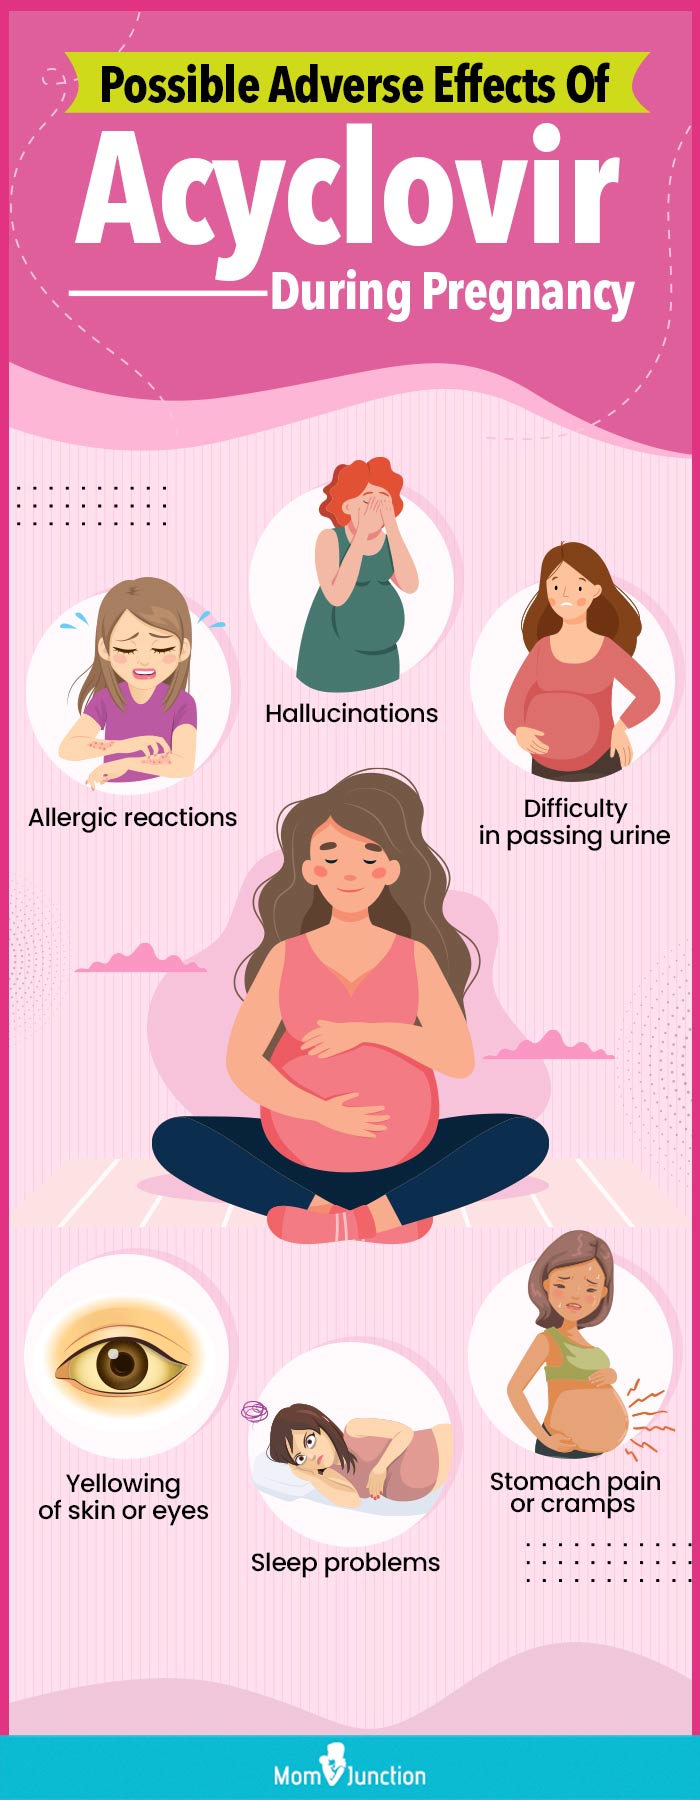 possible adverse effects of acyclovir during pregnancy(infographic)